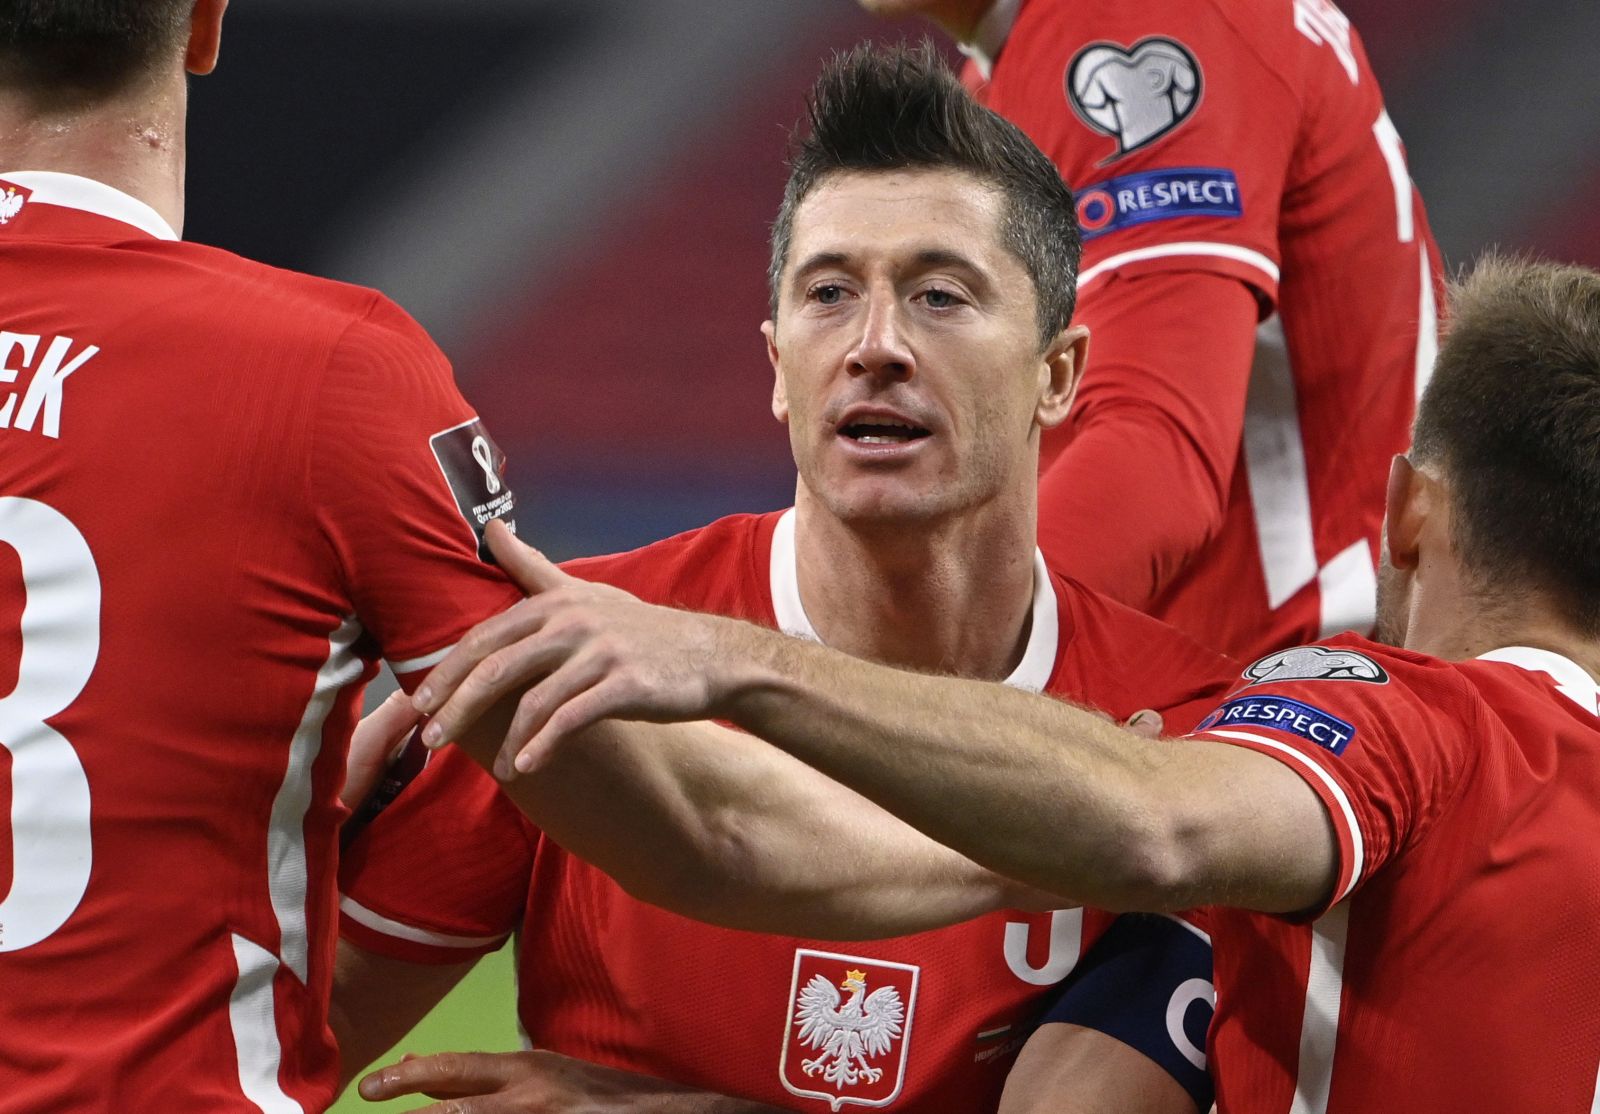 epa09097900 Robert Lewandowski (C) of Poland celebrates with team-mates after scoring the 3-3 goal during the FIFA World Cup 2022 qualifying soccer match between Hungary and Poland in the Puskas Ferenc Arena in Budapest, Hungary, 25 March 2021.  EPA/Zsolt Szigetvary HUNGARY OUT